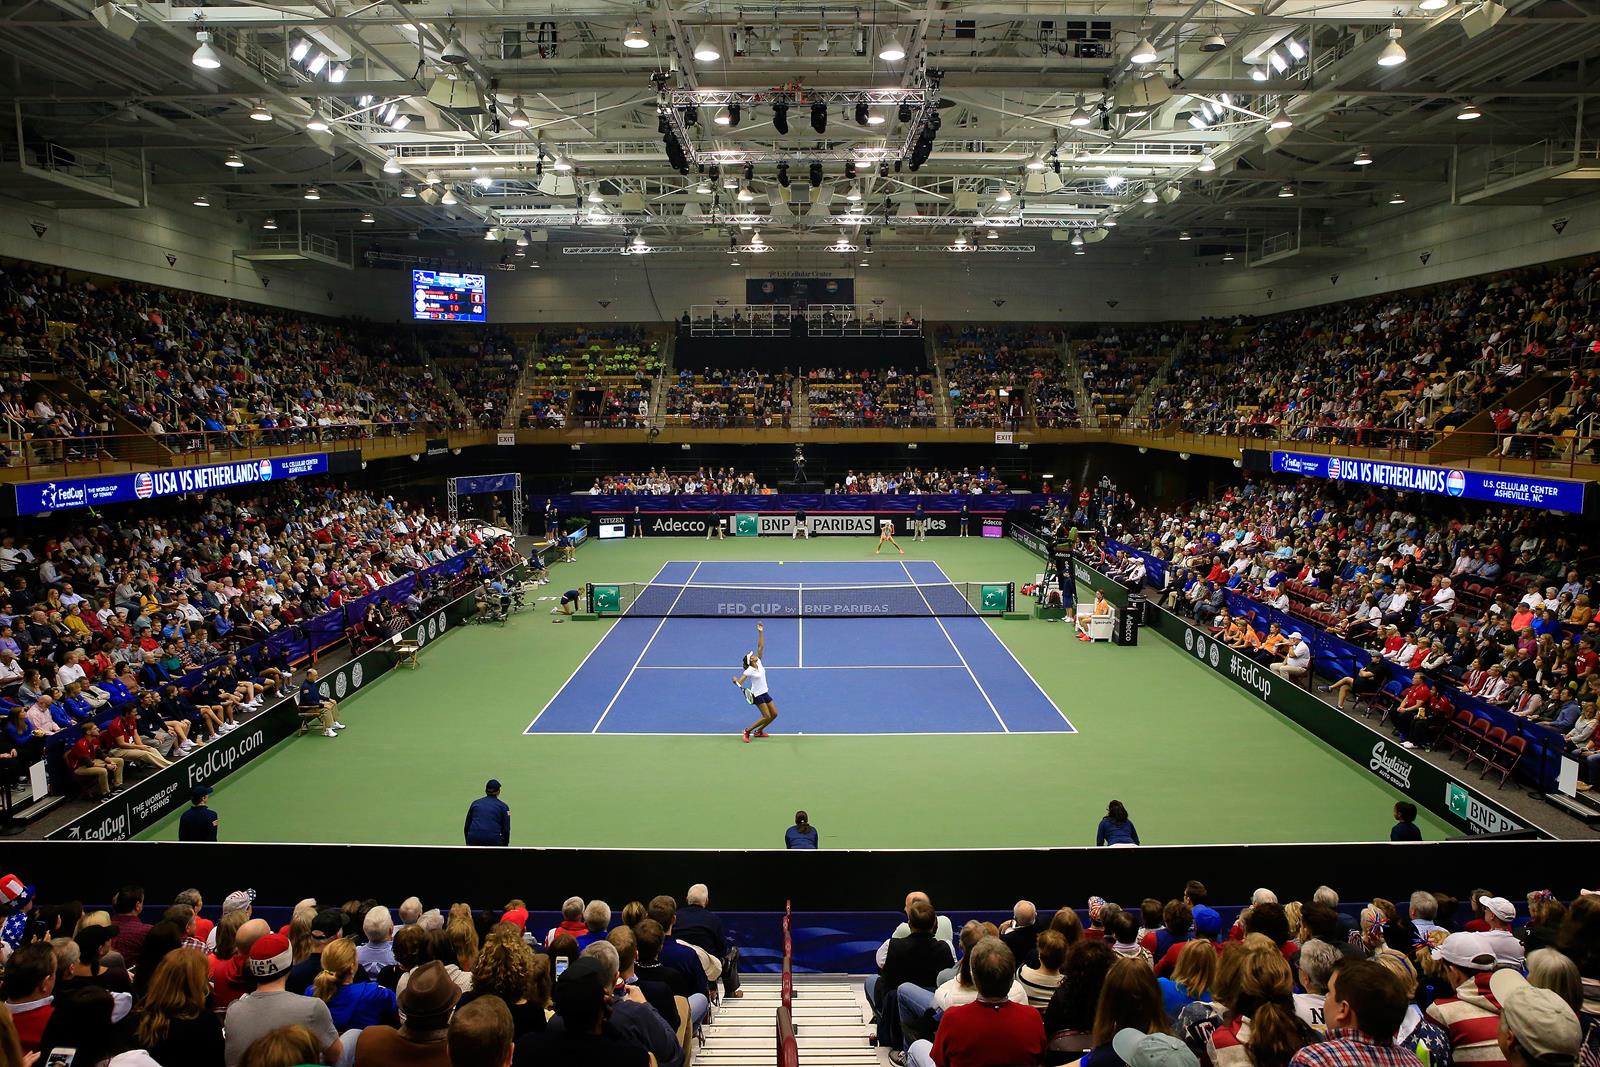 U.S. Cellular Center Fed Cup Arena View